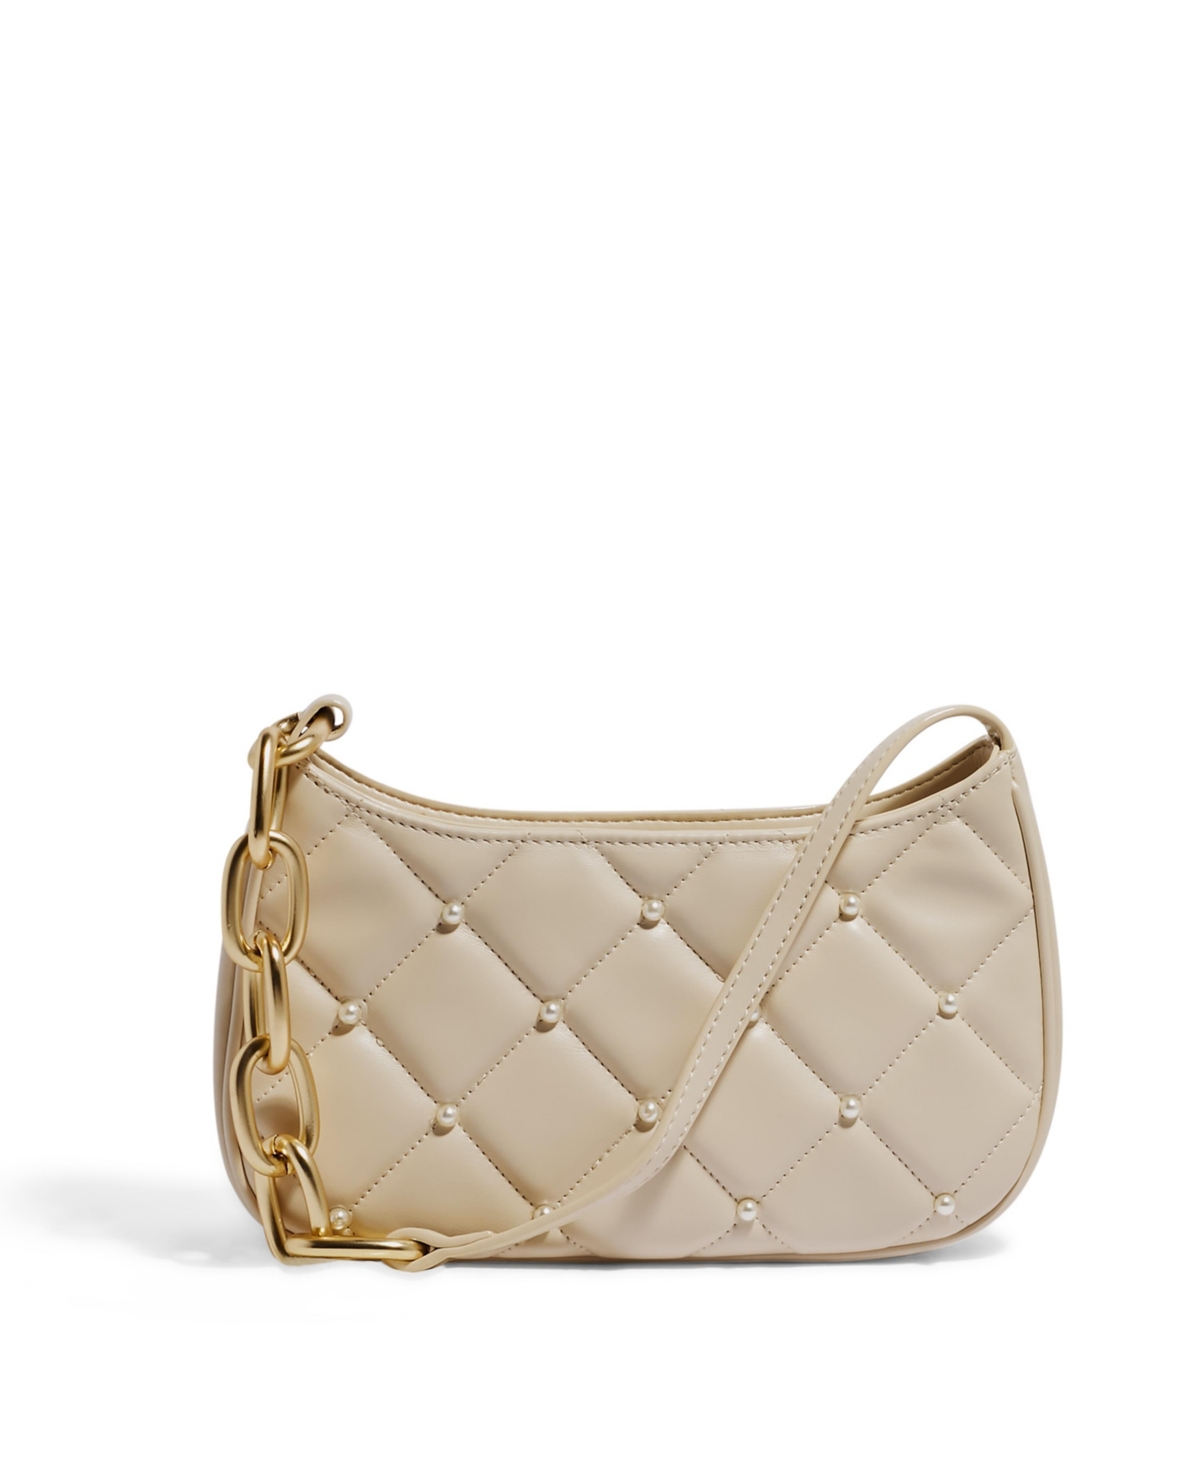 H.o.w Newbie Baguette Shoulder Bag - Winter white with pearls